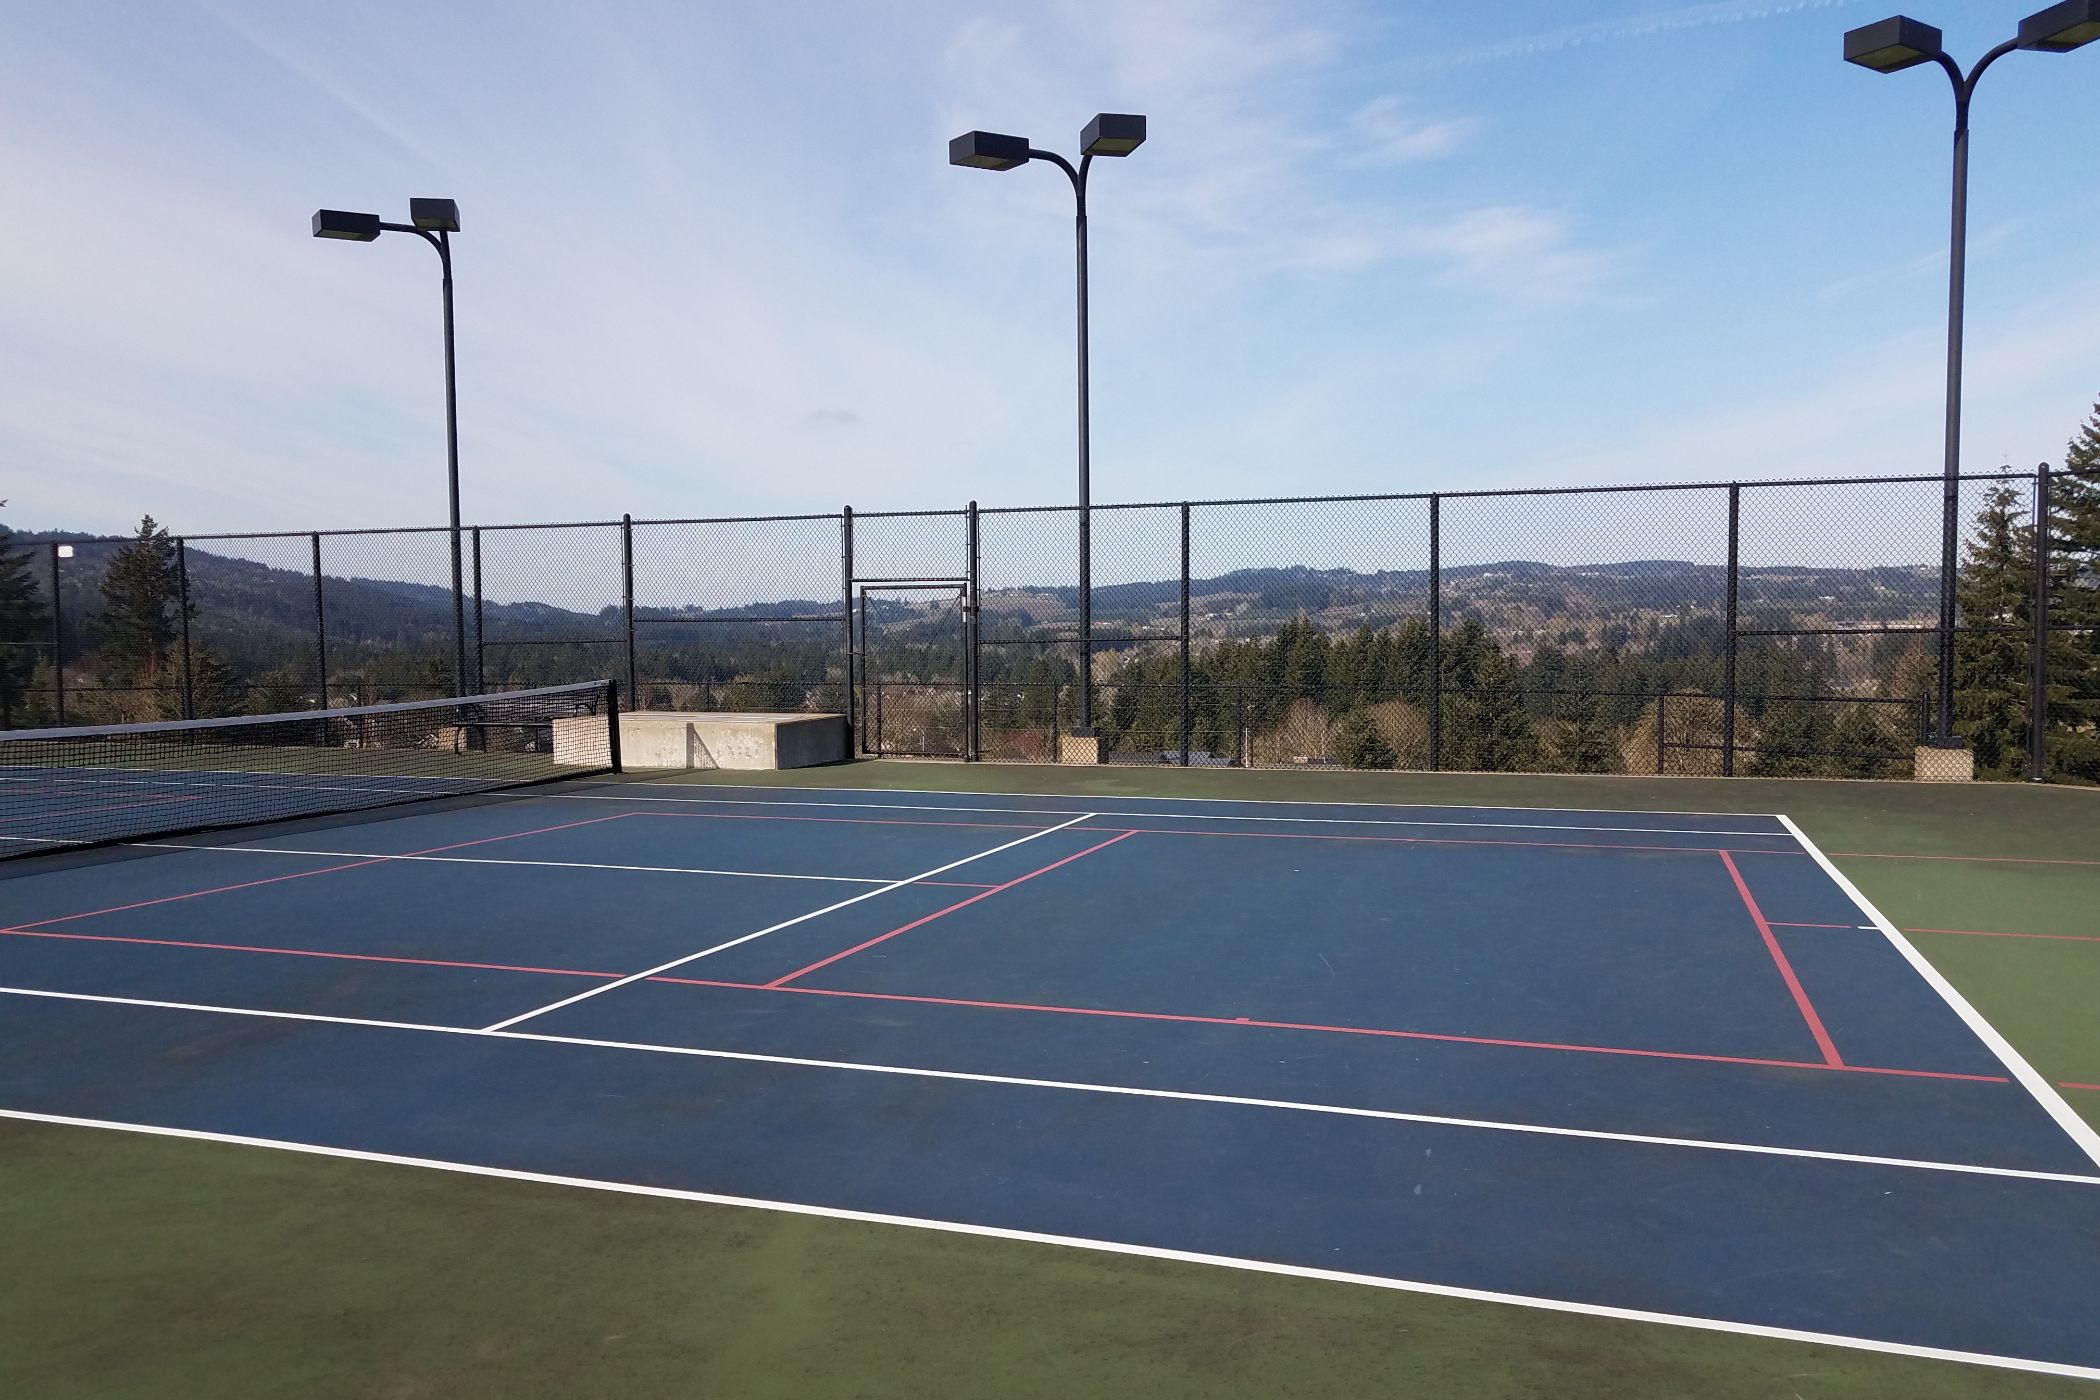 How Big Is A Full Size Pickleball Court?